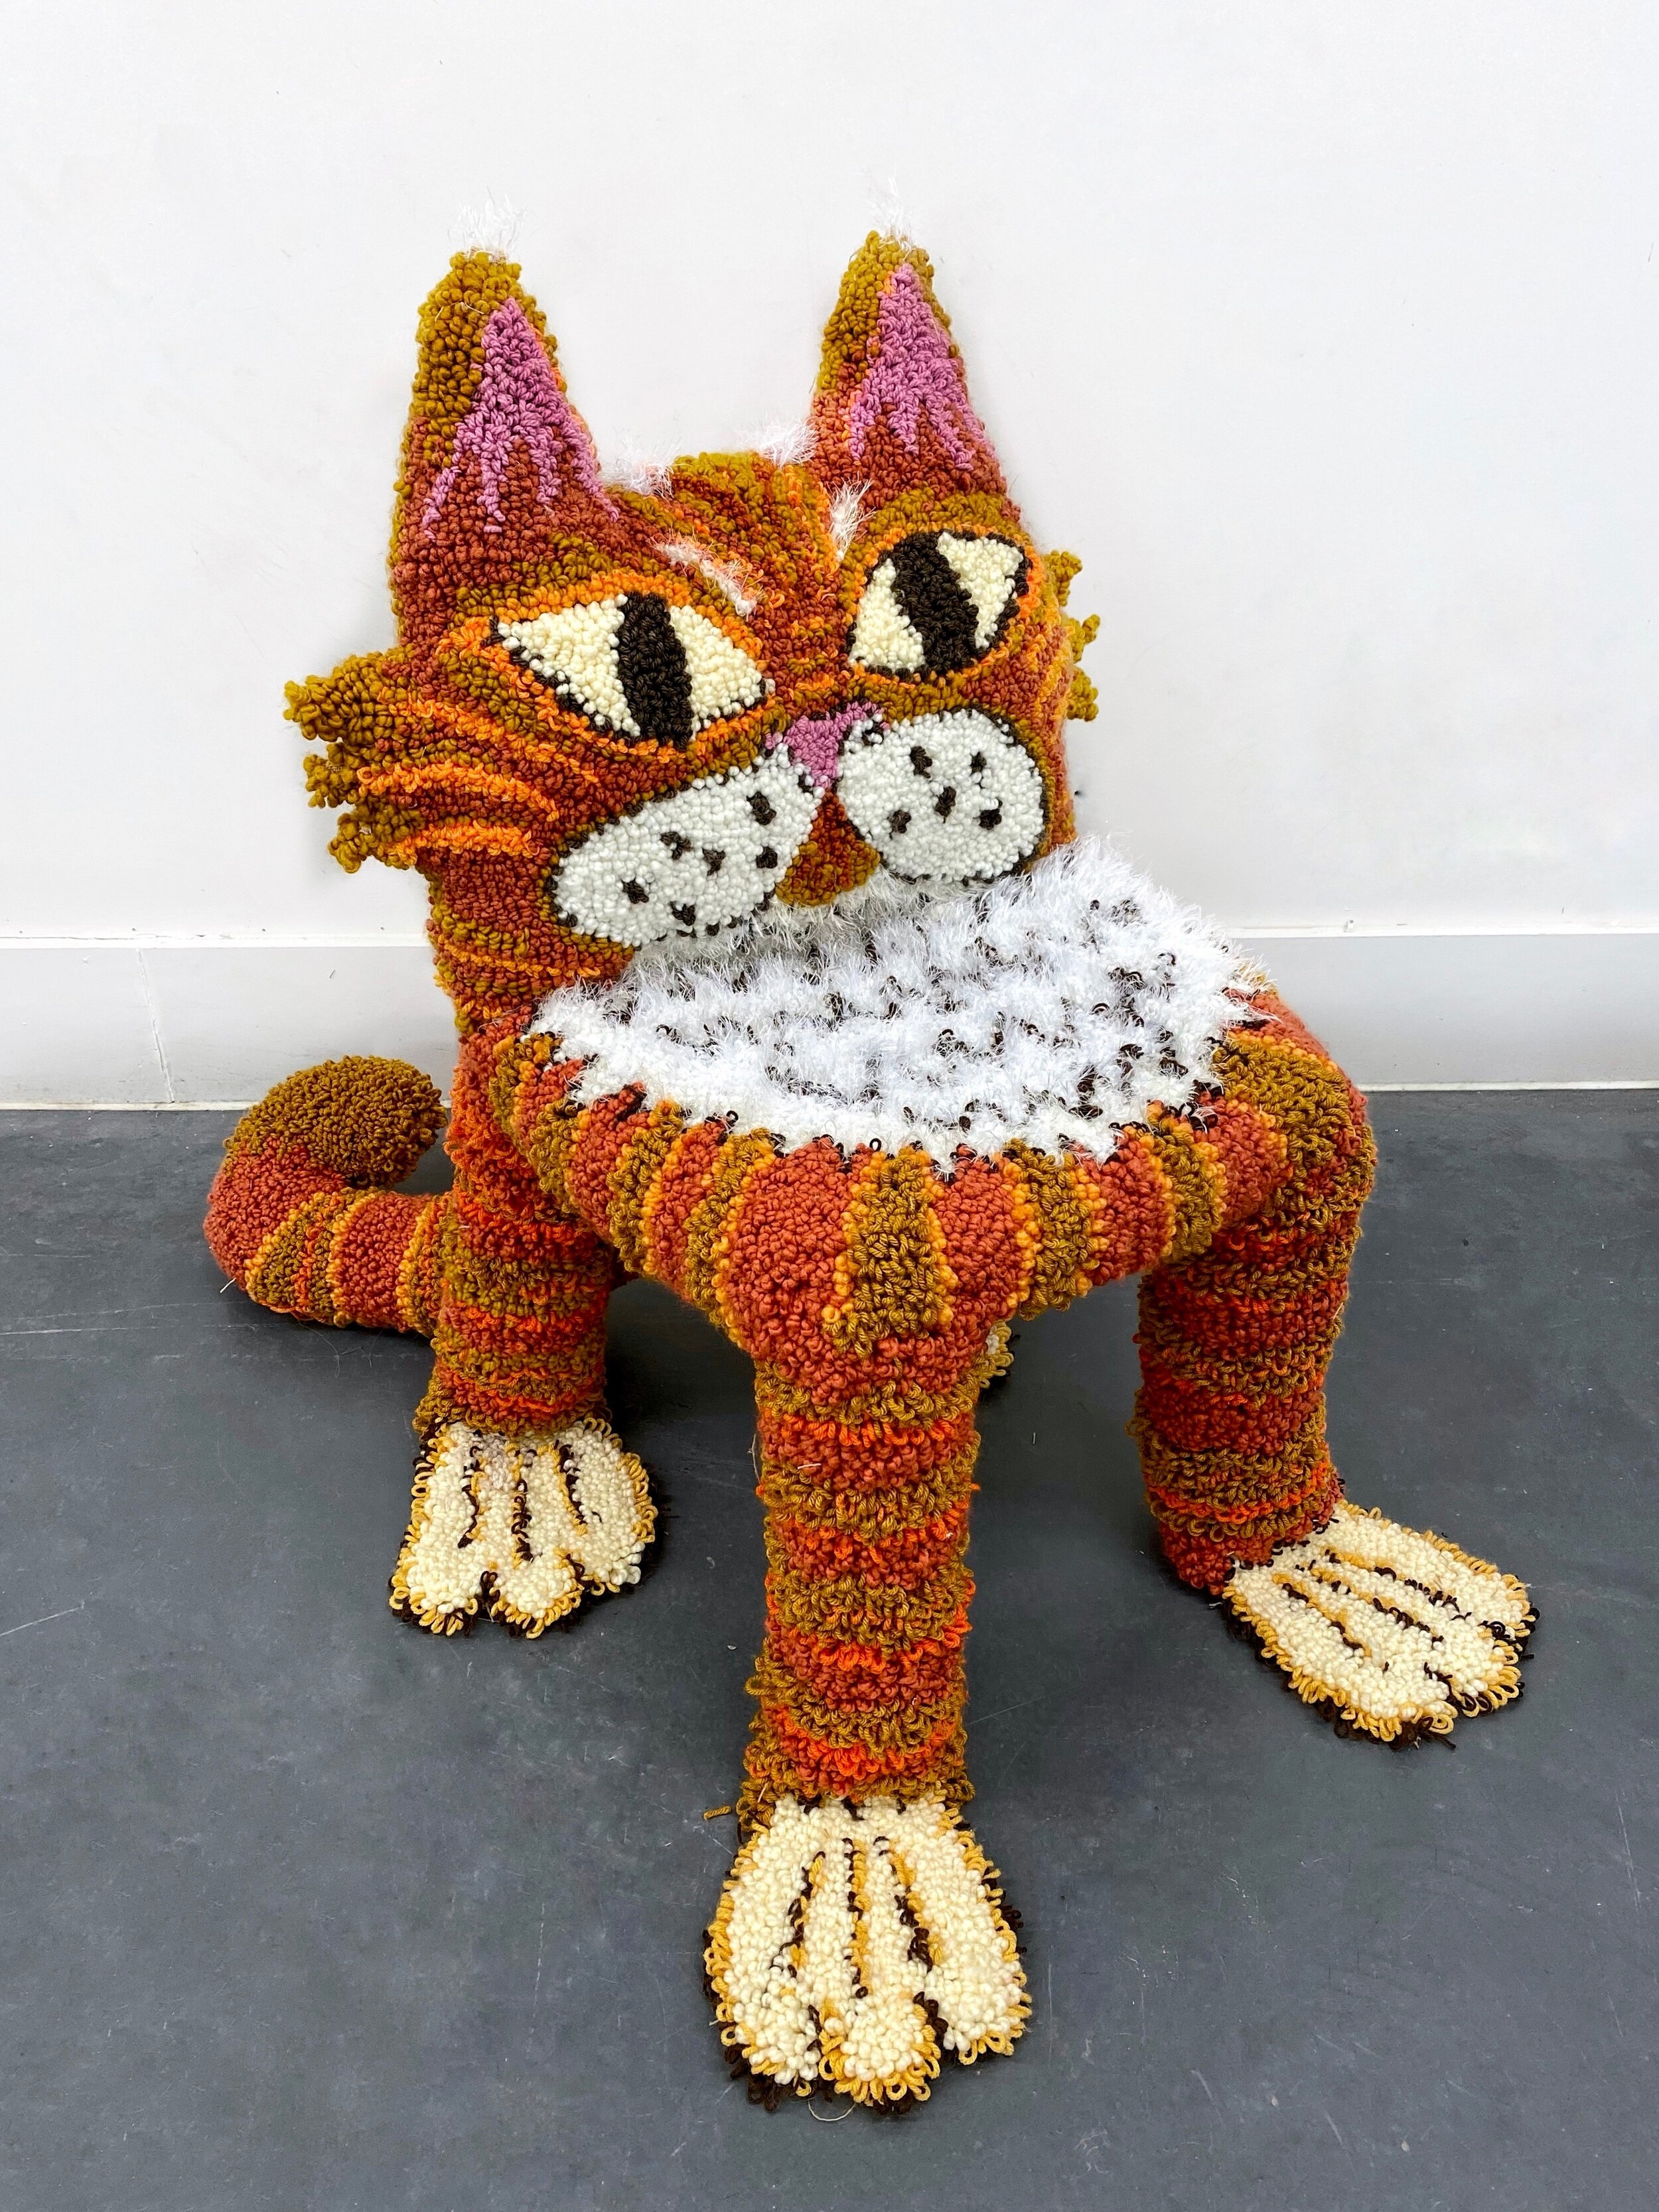 The Ginger Kitty wants me to sit on his knee’ 2021, 115x140cm, Wool and hessian on plastic chair